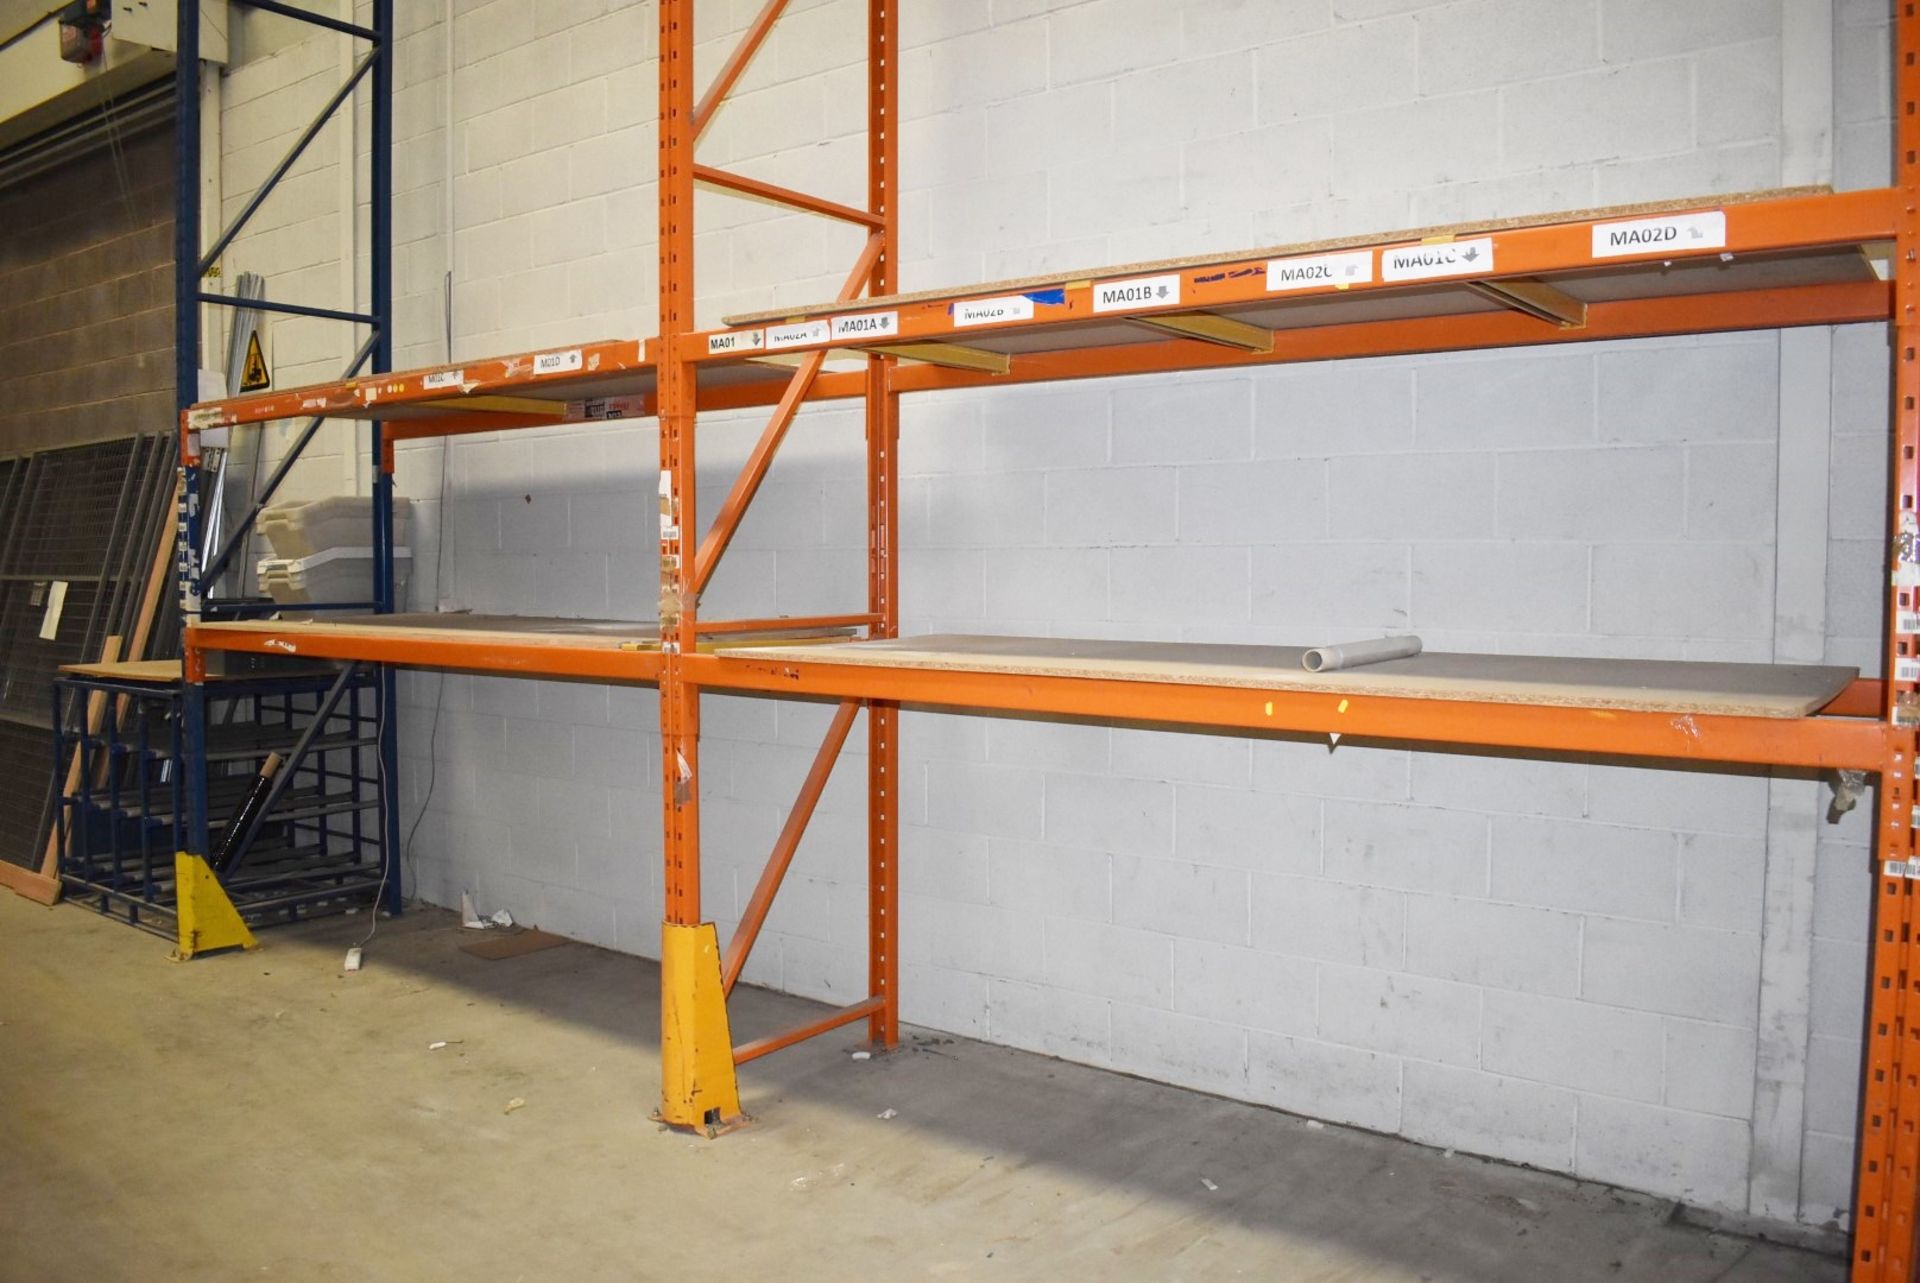 4 x Bays of RediRack Warehouse Pallet Racking - Lot Includes 5 x Uprights and 26 x Crossbeams - - Image 5 of 7